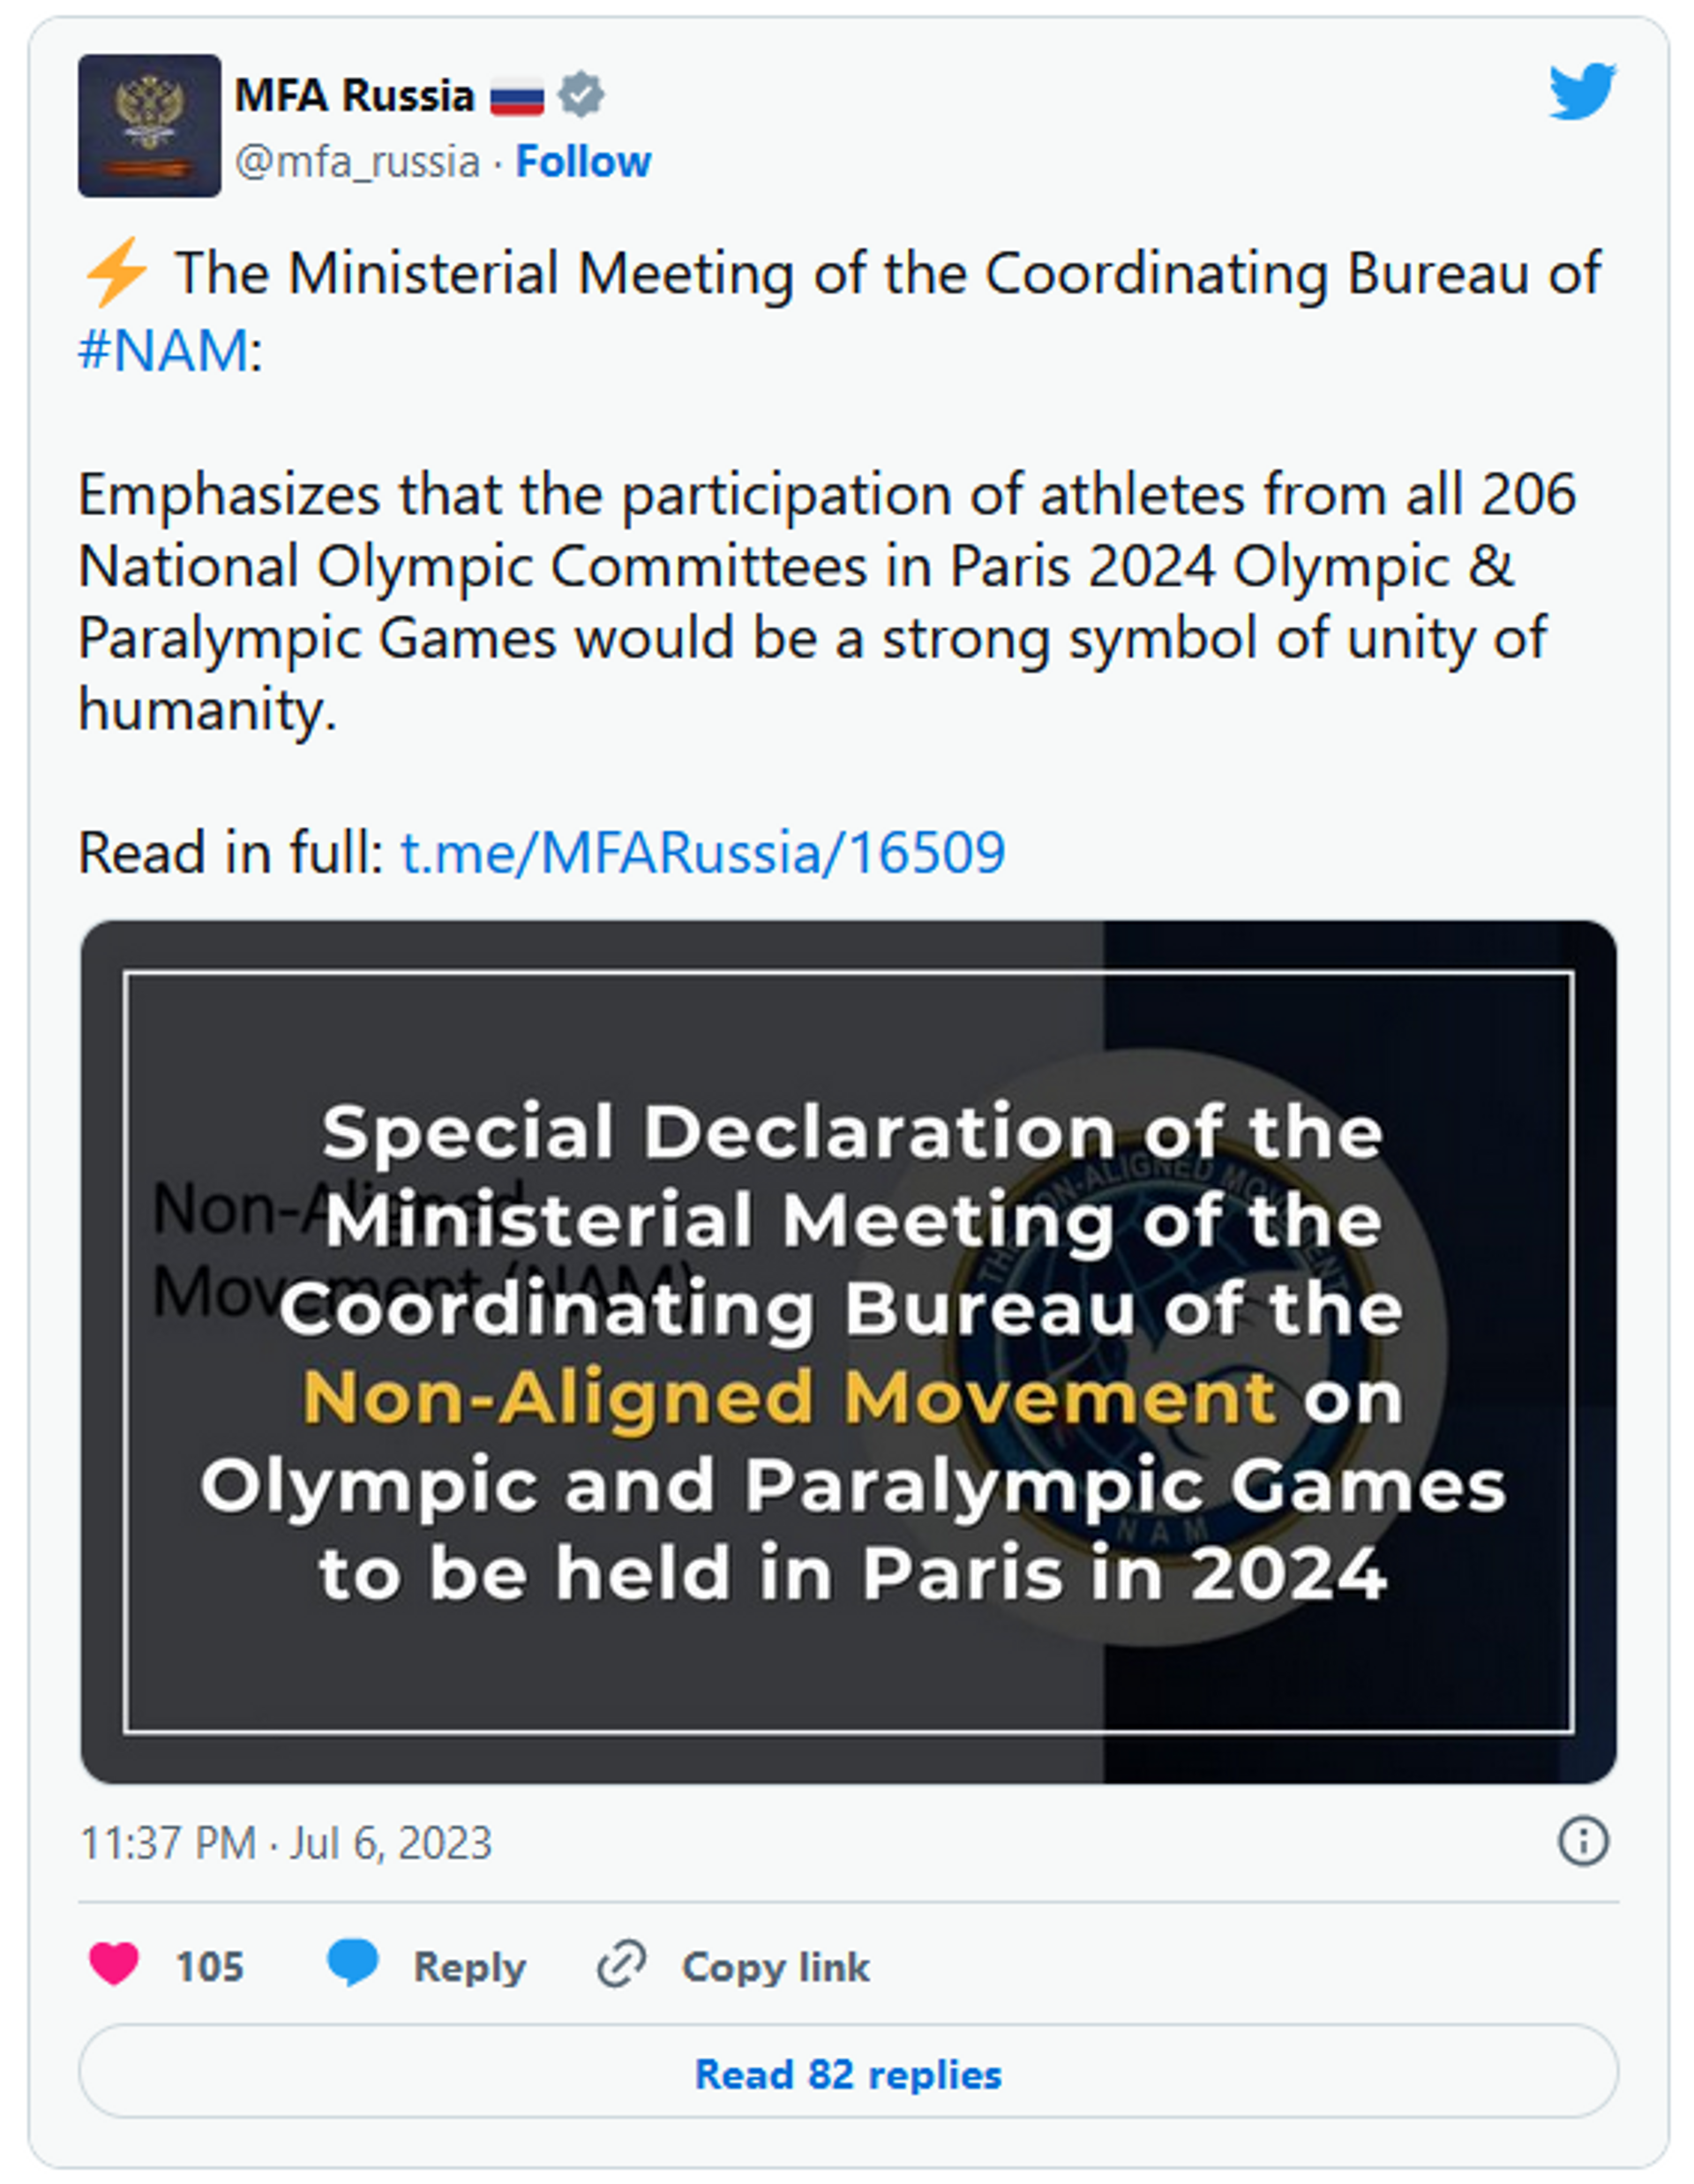 The Ministerial Meeting of the Coordinating Bureau of NAM - Sputnik Africa, 1920, 07.07.2023